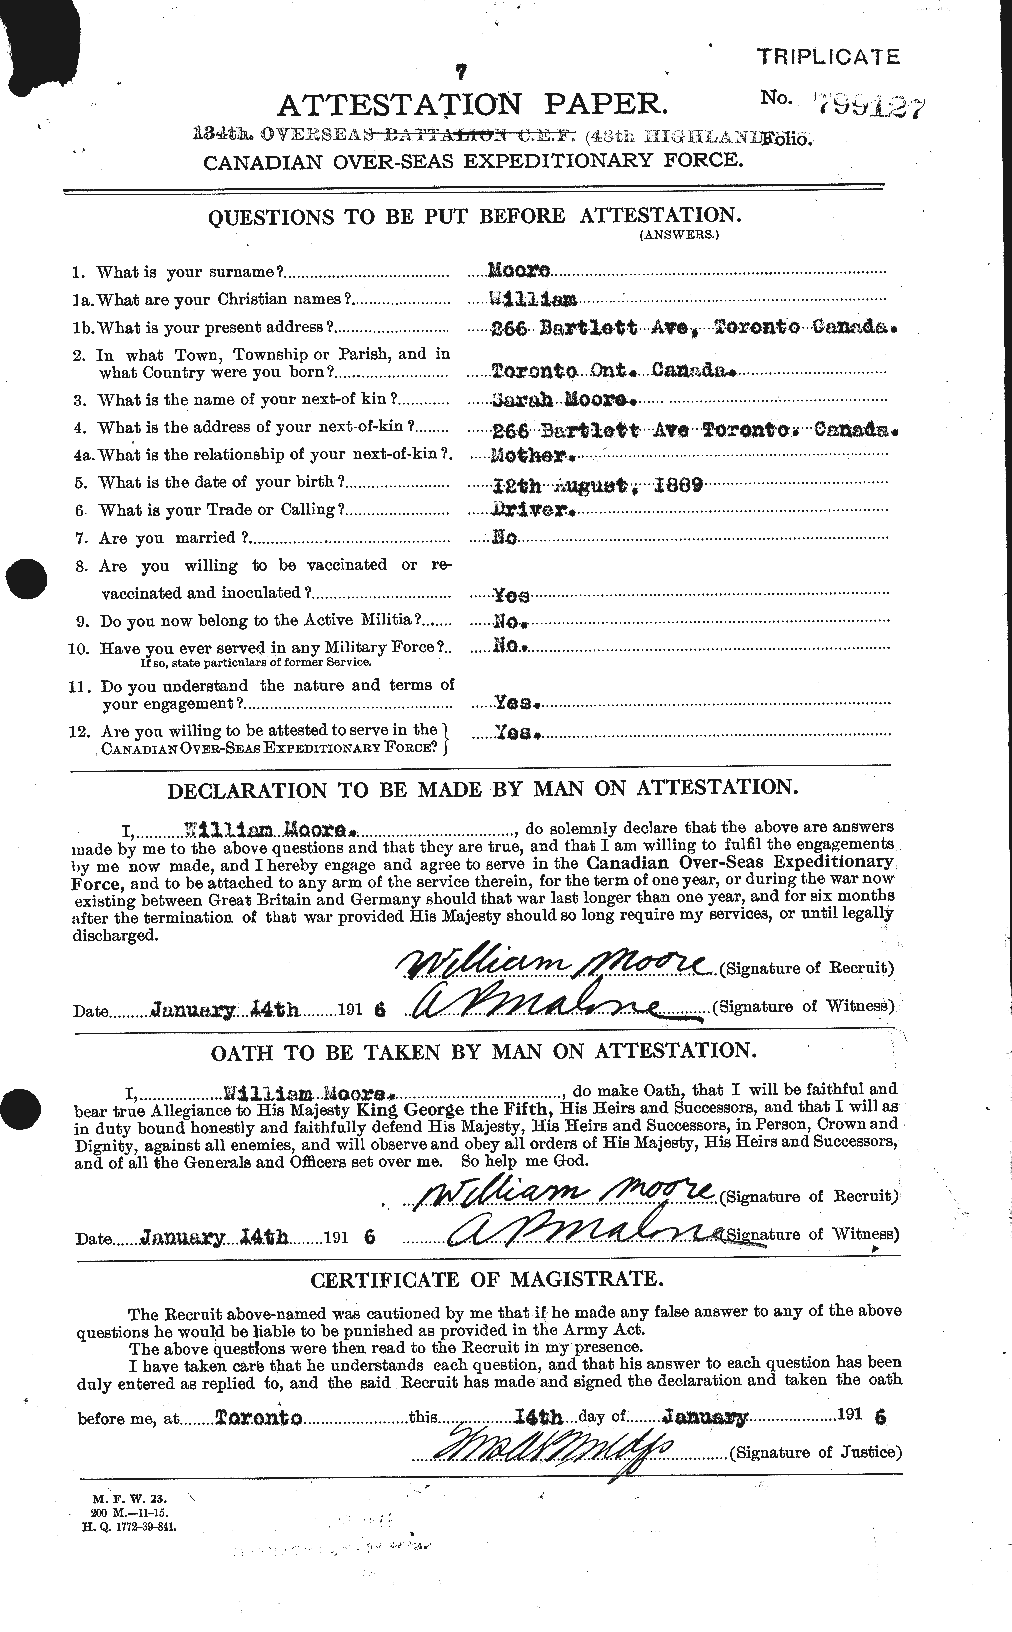 Personnel Records of the First World War - CEF 505762a